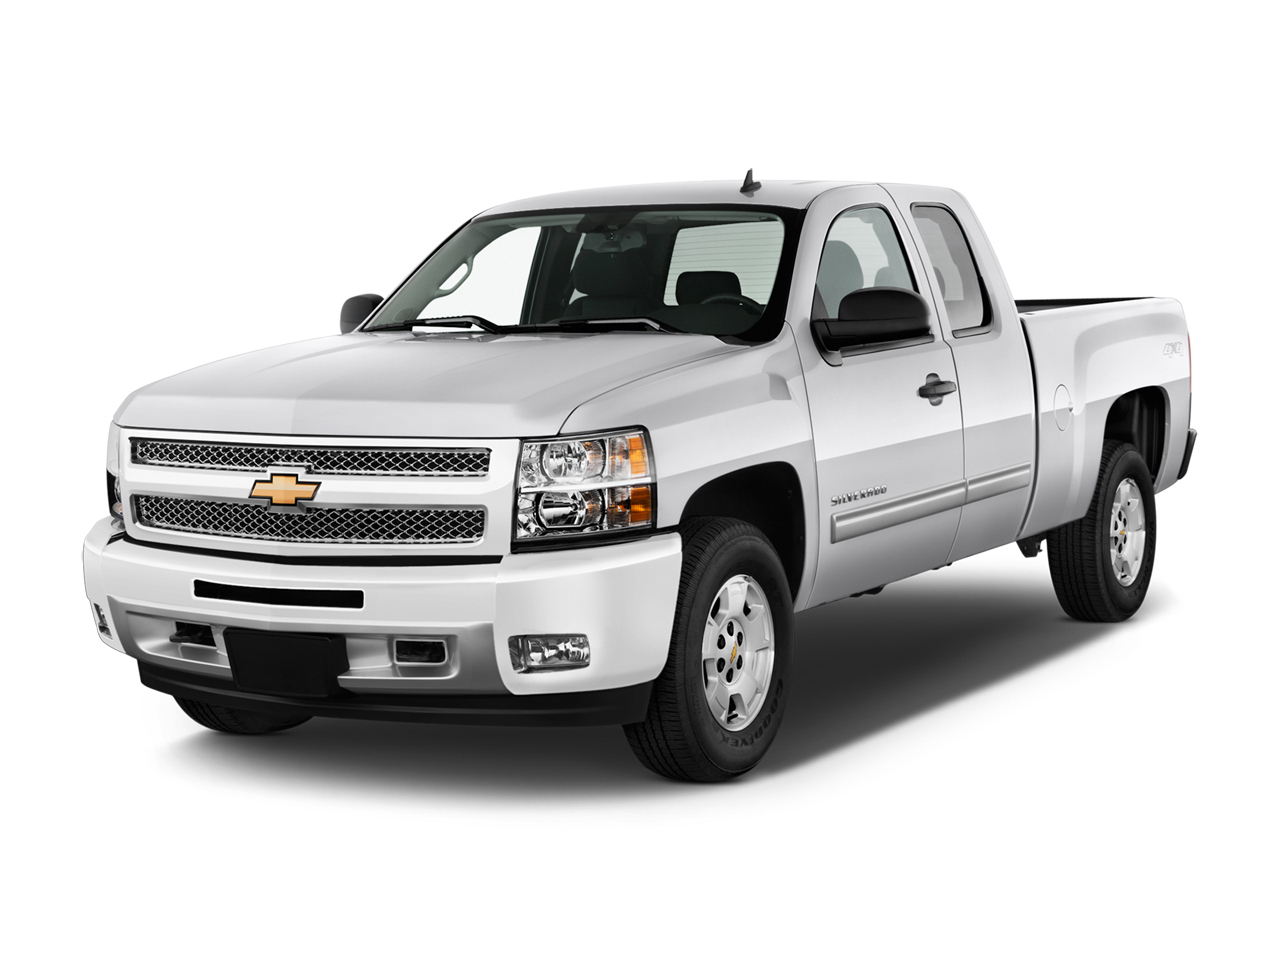 2012 Chevrolet Silverado 1500 (Chevy) Review, Ratings, Specs, Prices